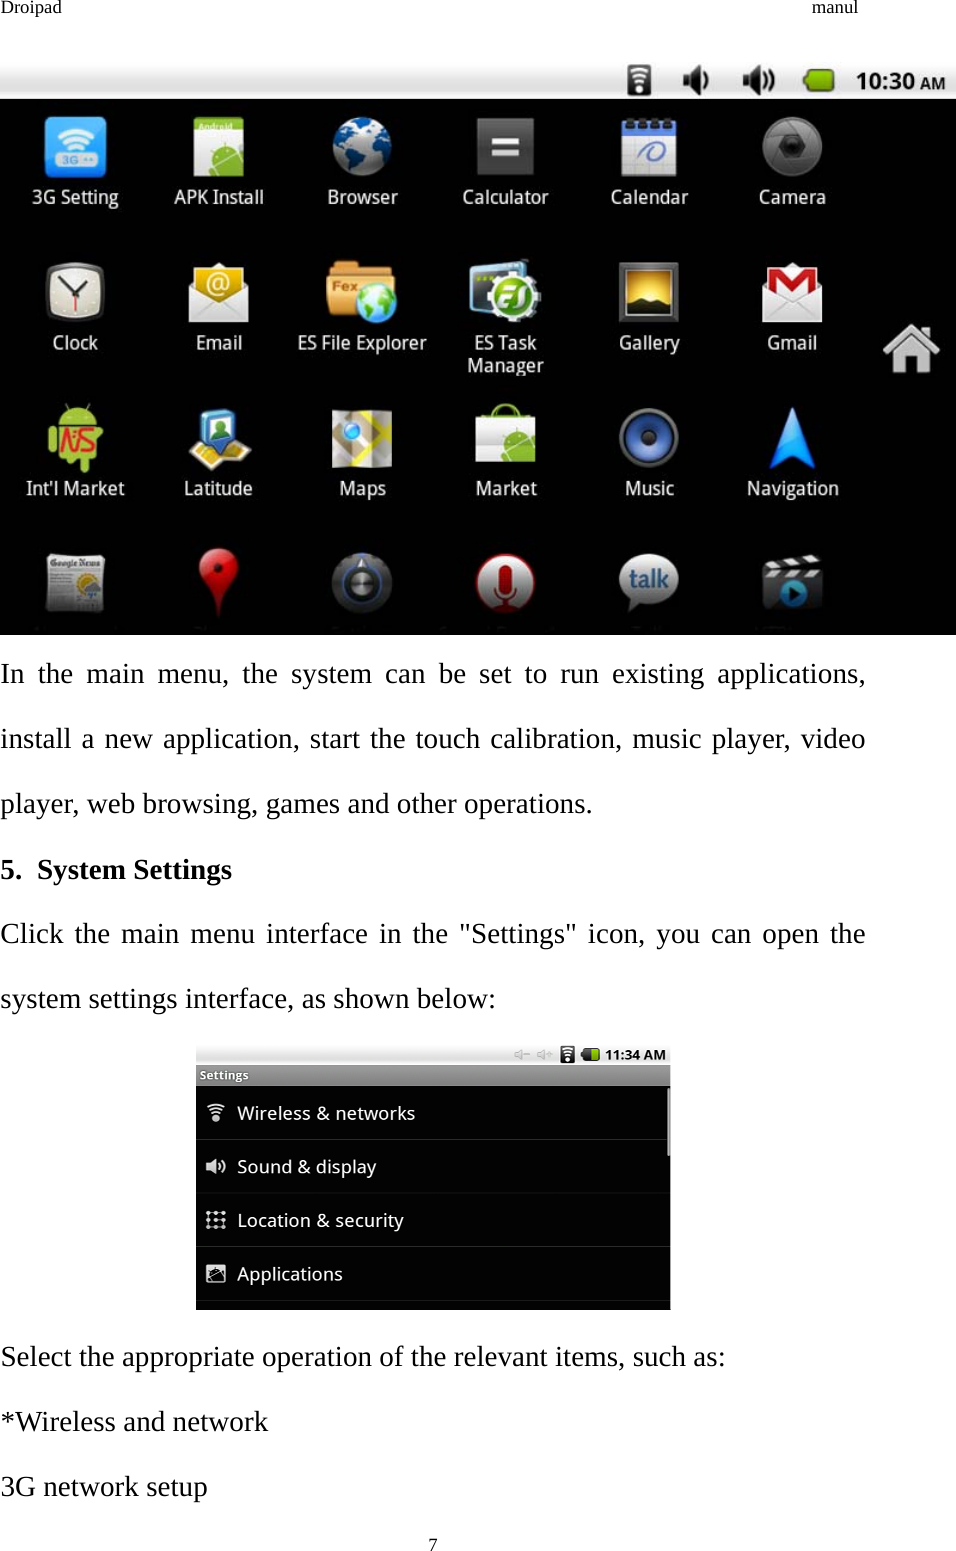 Droipad                                                                                manul  In the main menu, the system can be set to run existing applications, install a new application, start the touch calibration, music player, video player, web browsing, games and other operations. 5. System Settings Click the main menu interface in the &quot;Settings&quot; icon, you can open the system settings interface, as shown below:  Select the appropriate operation of the relevant items, such as: *Wireless and network 3G network setup  7